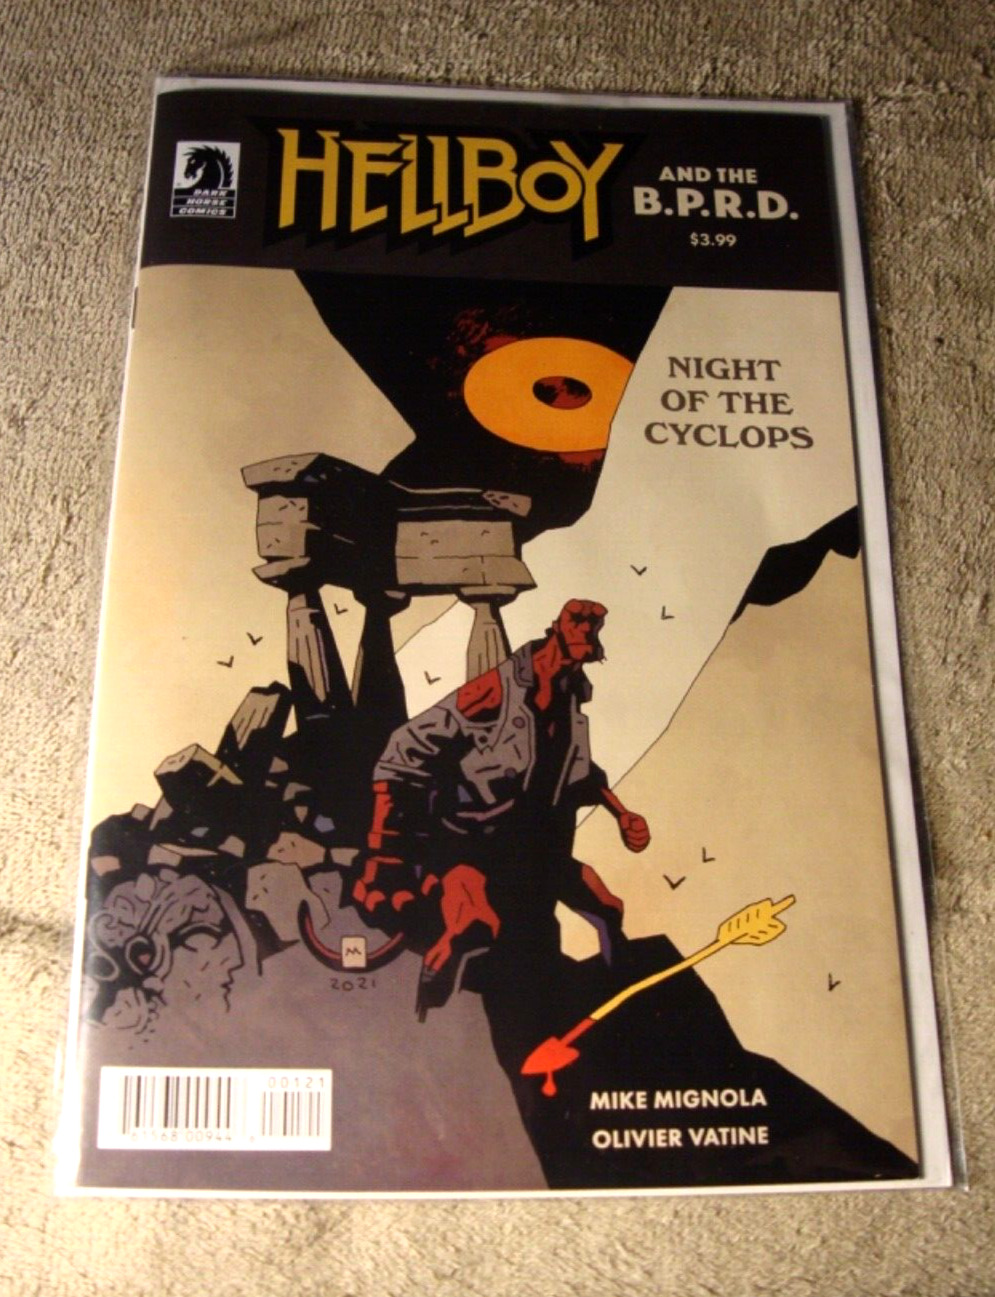 HELLBOY AND BPRD - NIGHT OF THE CYCLOPS #1 COVER B VARIANT - BAGGED & BOARDED